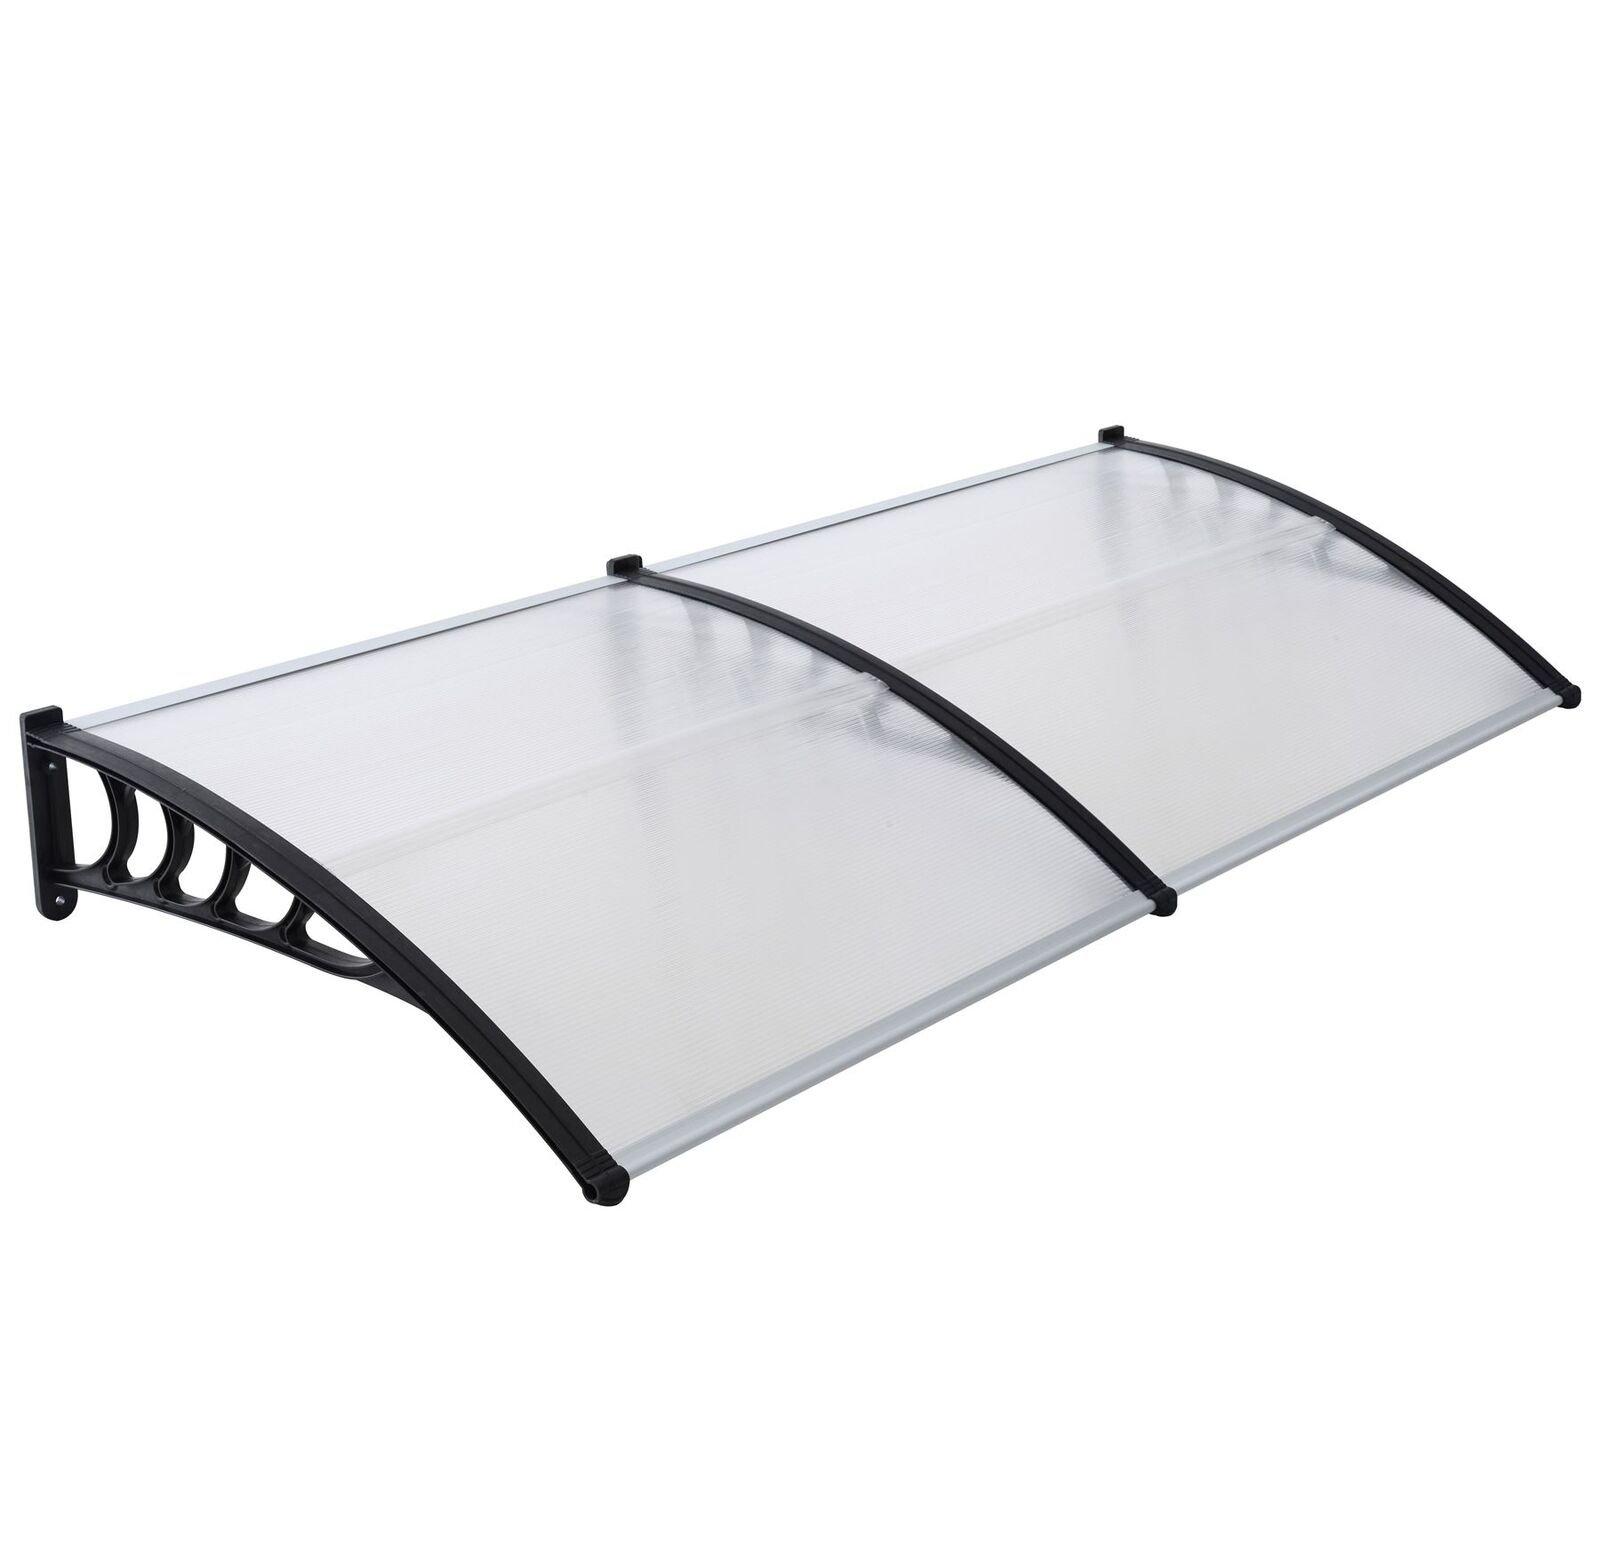 Door Canopy Porch Rain Protector Awning Lean-To Roof Shelter 90 X 300cm